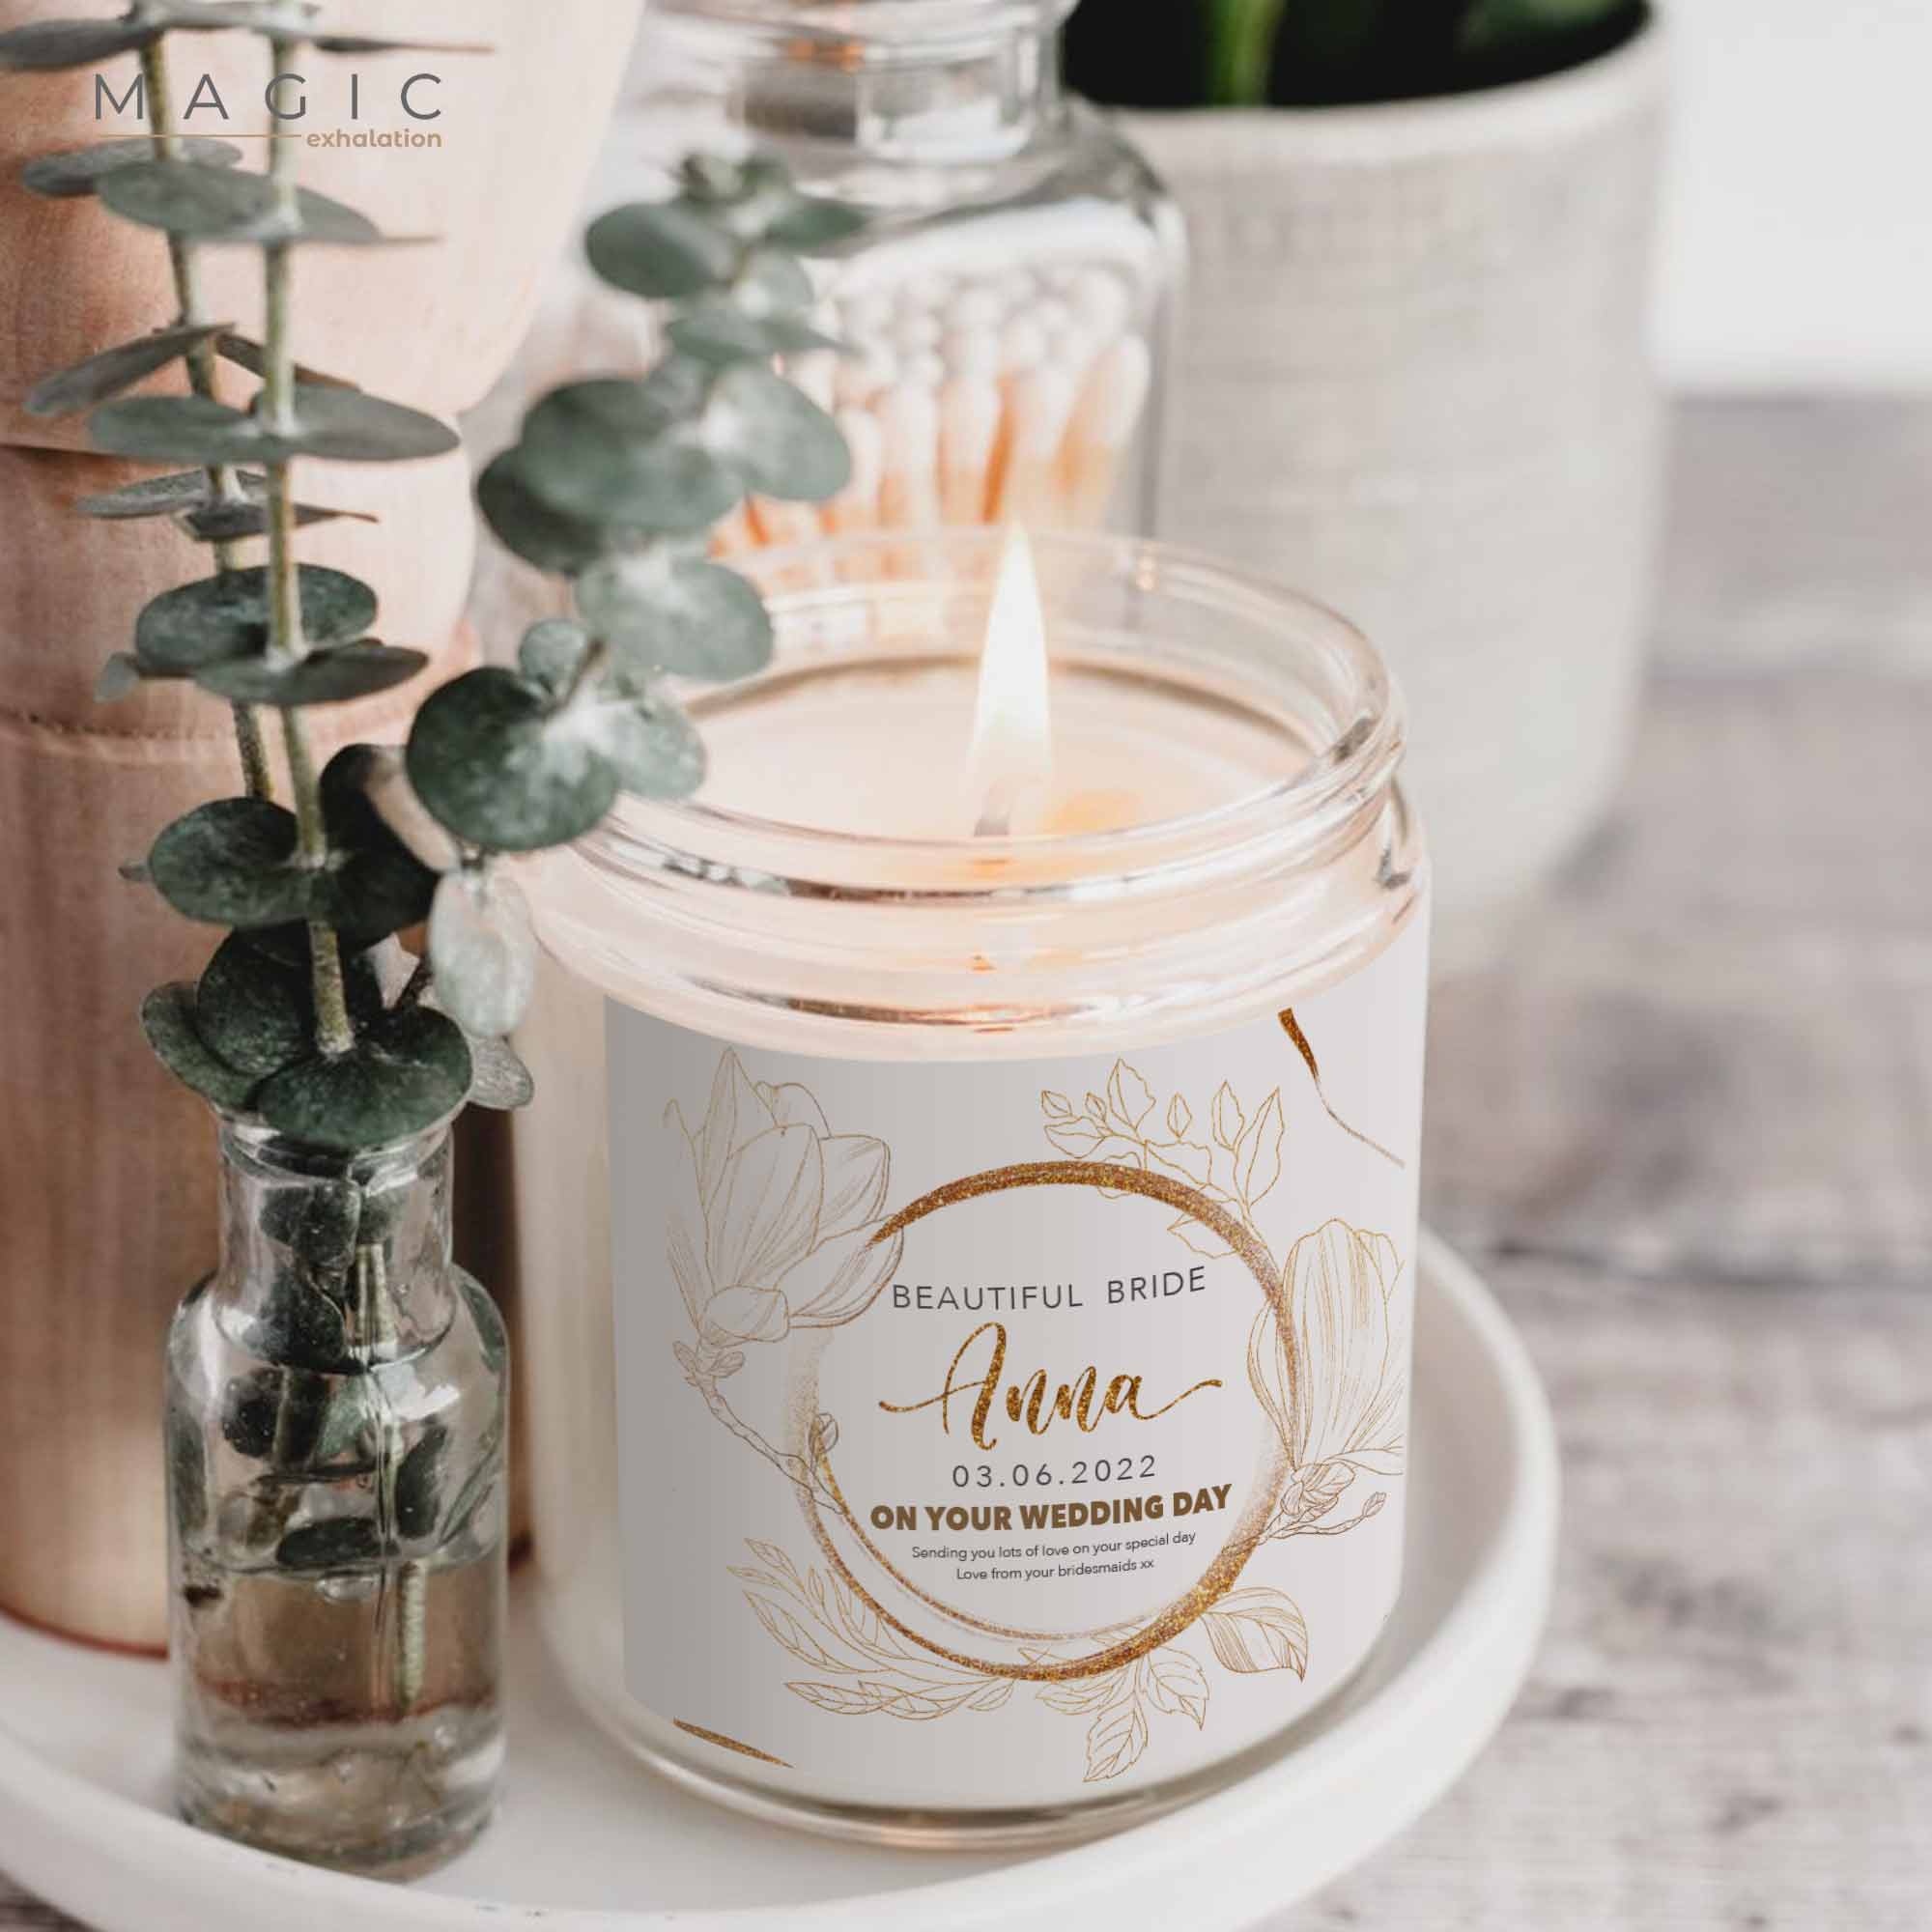 Wedding Gift For Bride Candle, Personalized Candle Gift From Bridesmaids, Bridal Shower Gift For Bride To Be, Unique Candles Engagement Gift